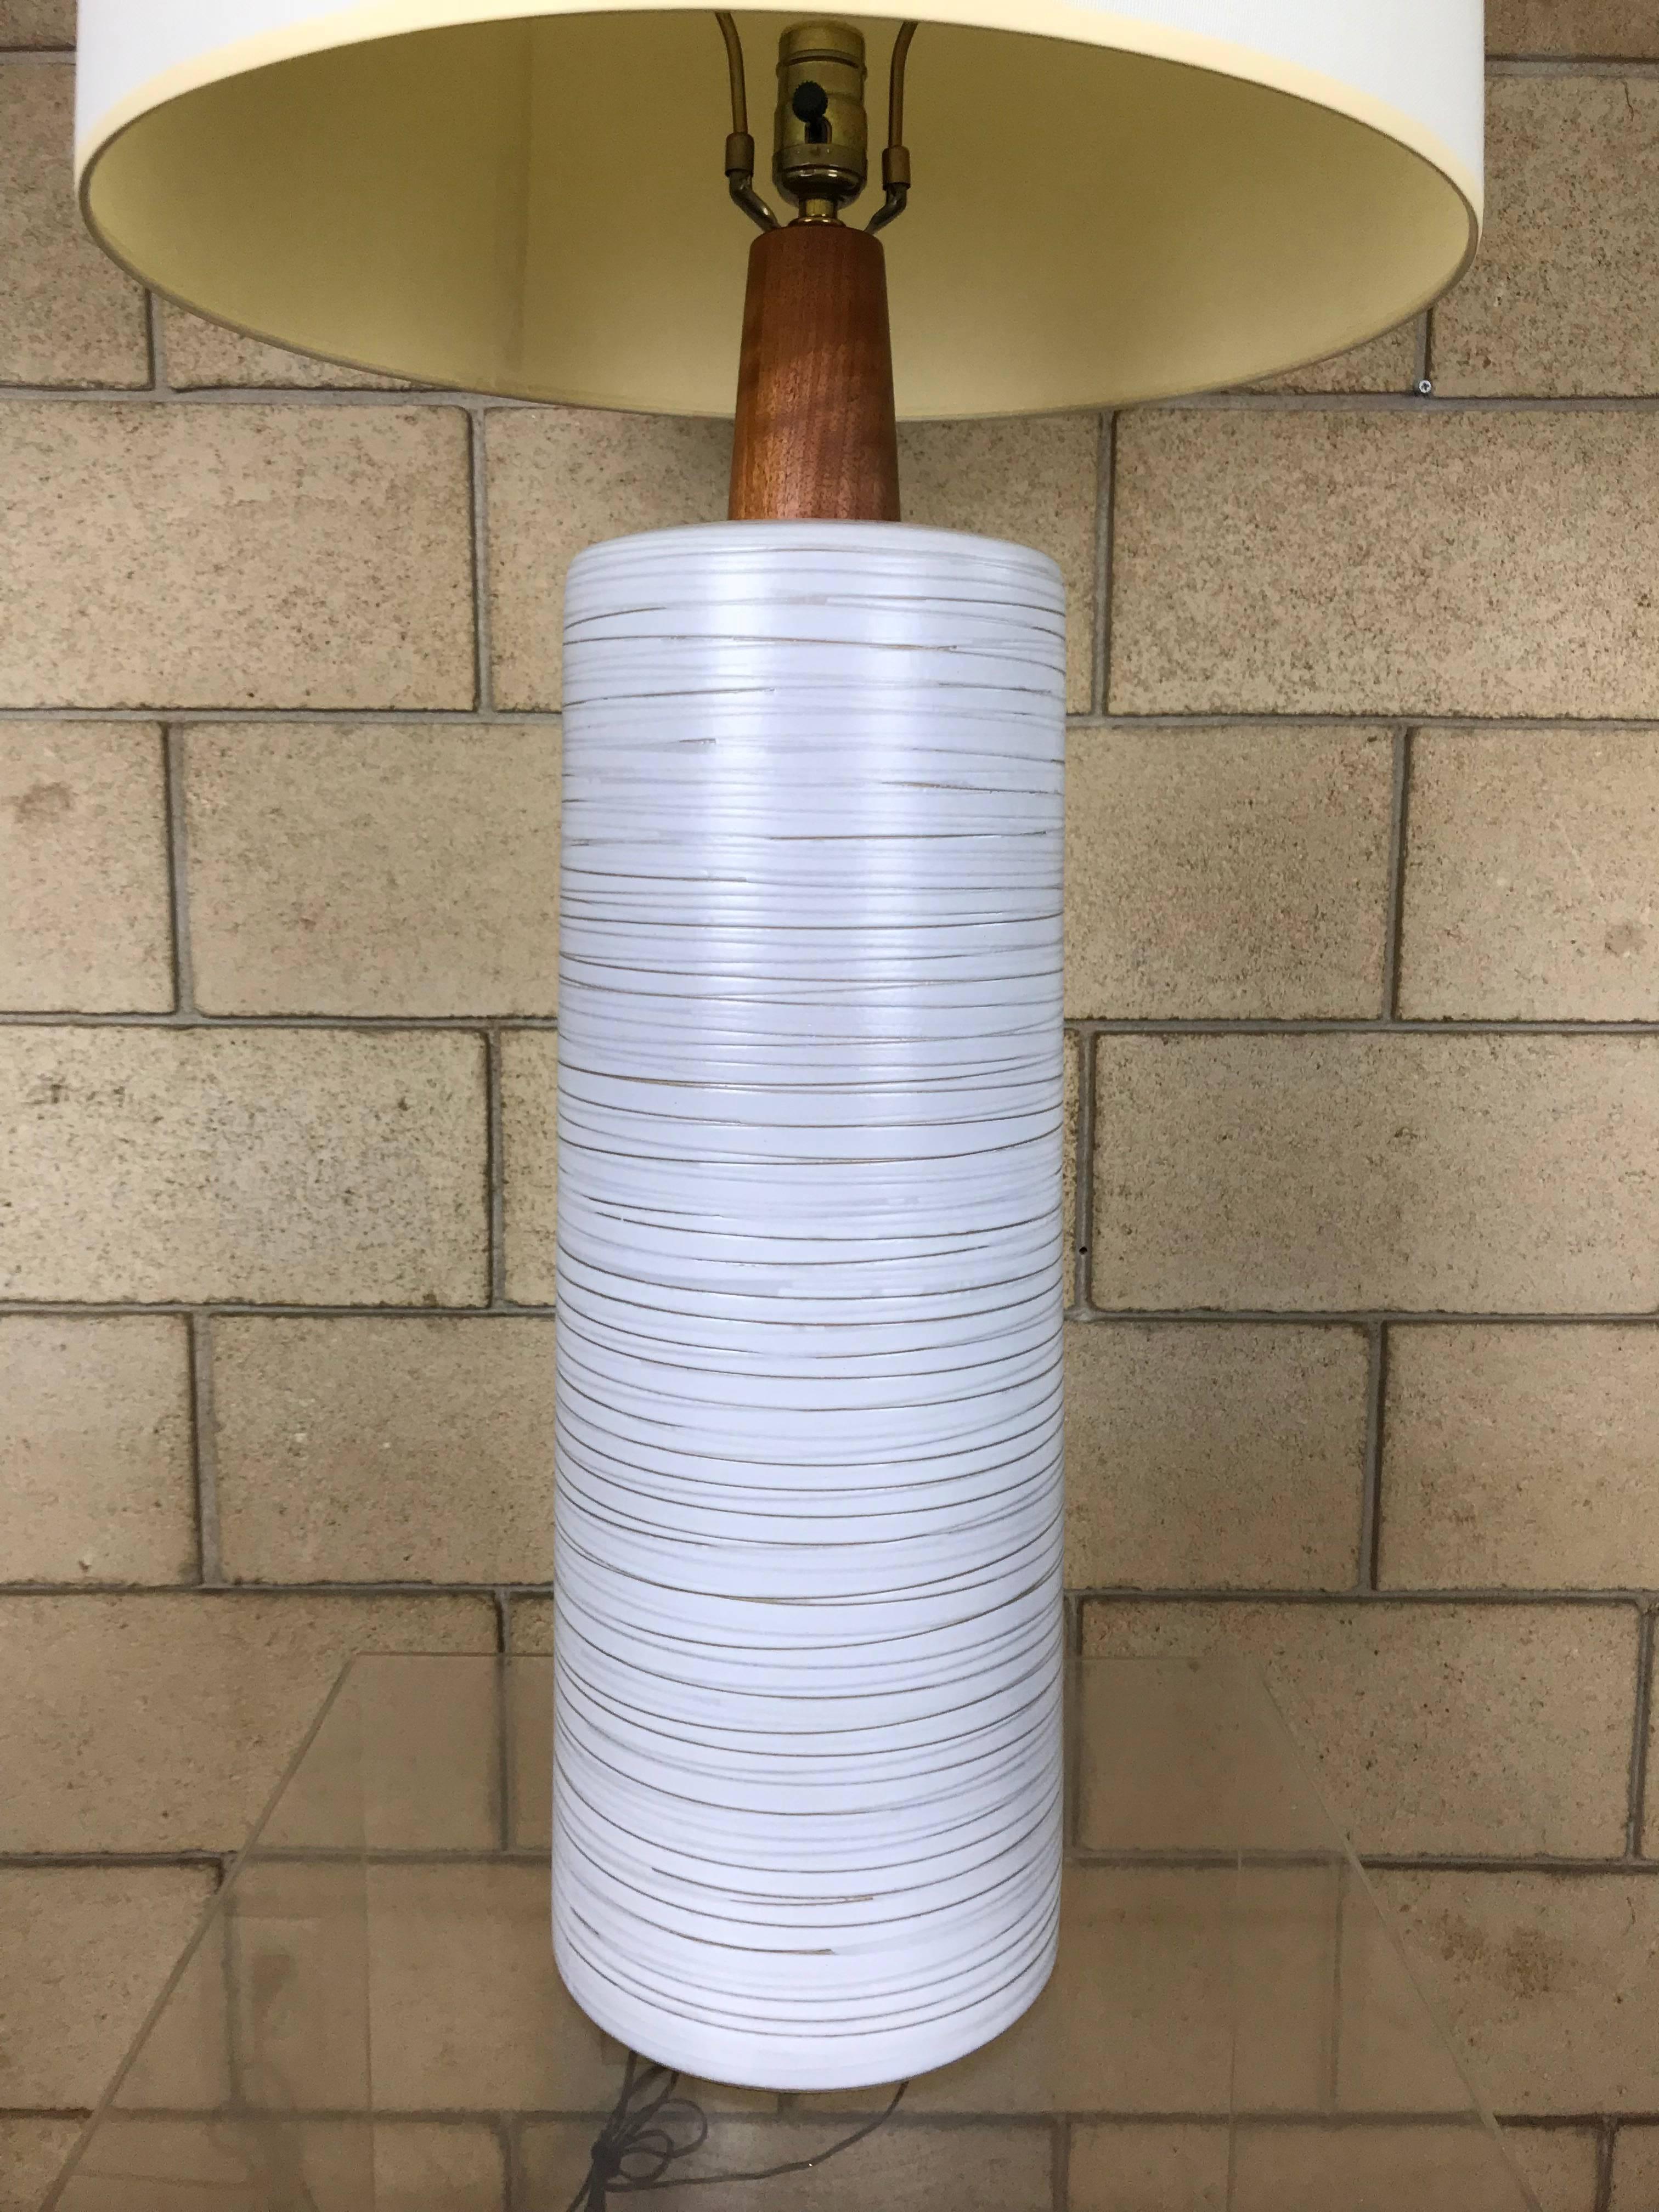 Monumental ceramic studio-made ceramic and teak lamp designed by Jane & Gordon Martz for Marshall Studios, circa 1965. Original teak finial is present. The lamp base is signed. No chips or cracks - it is pristine. I believe this is the original